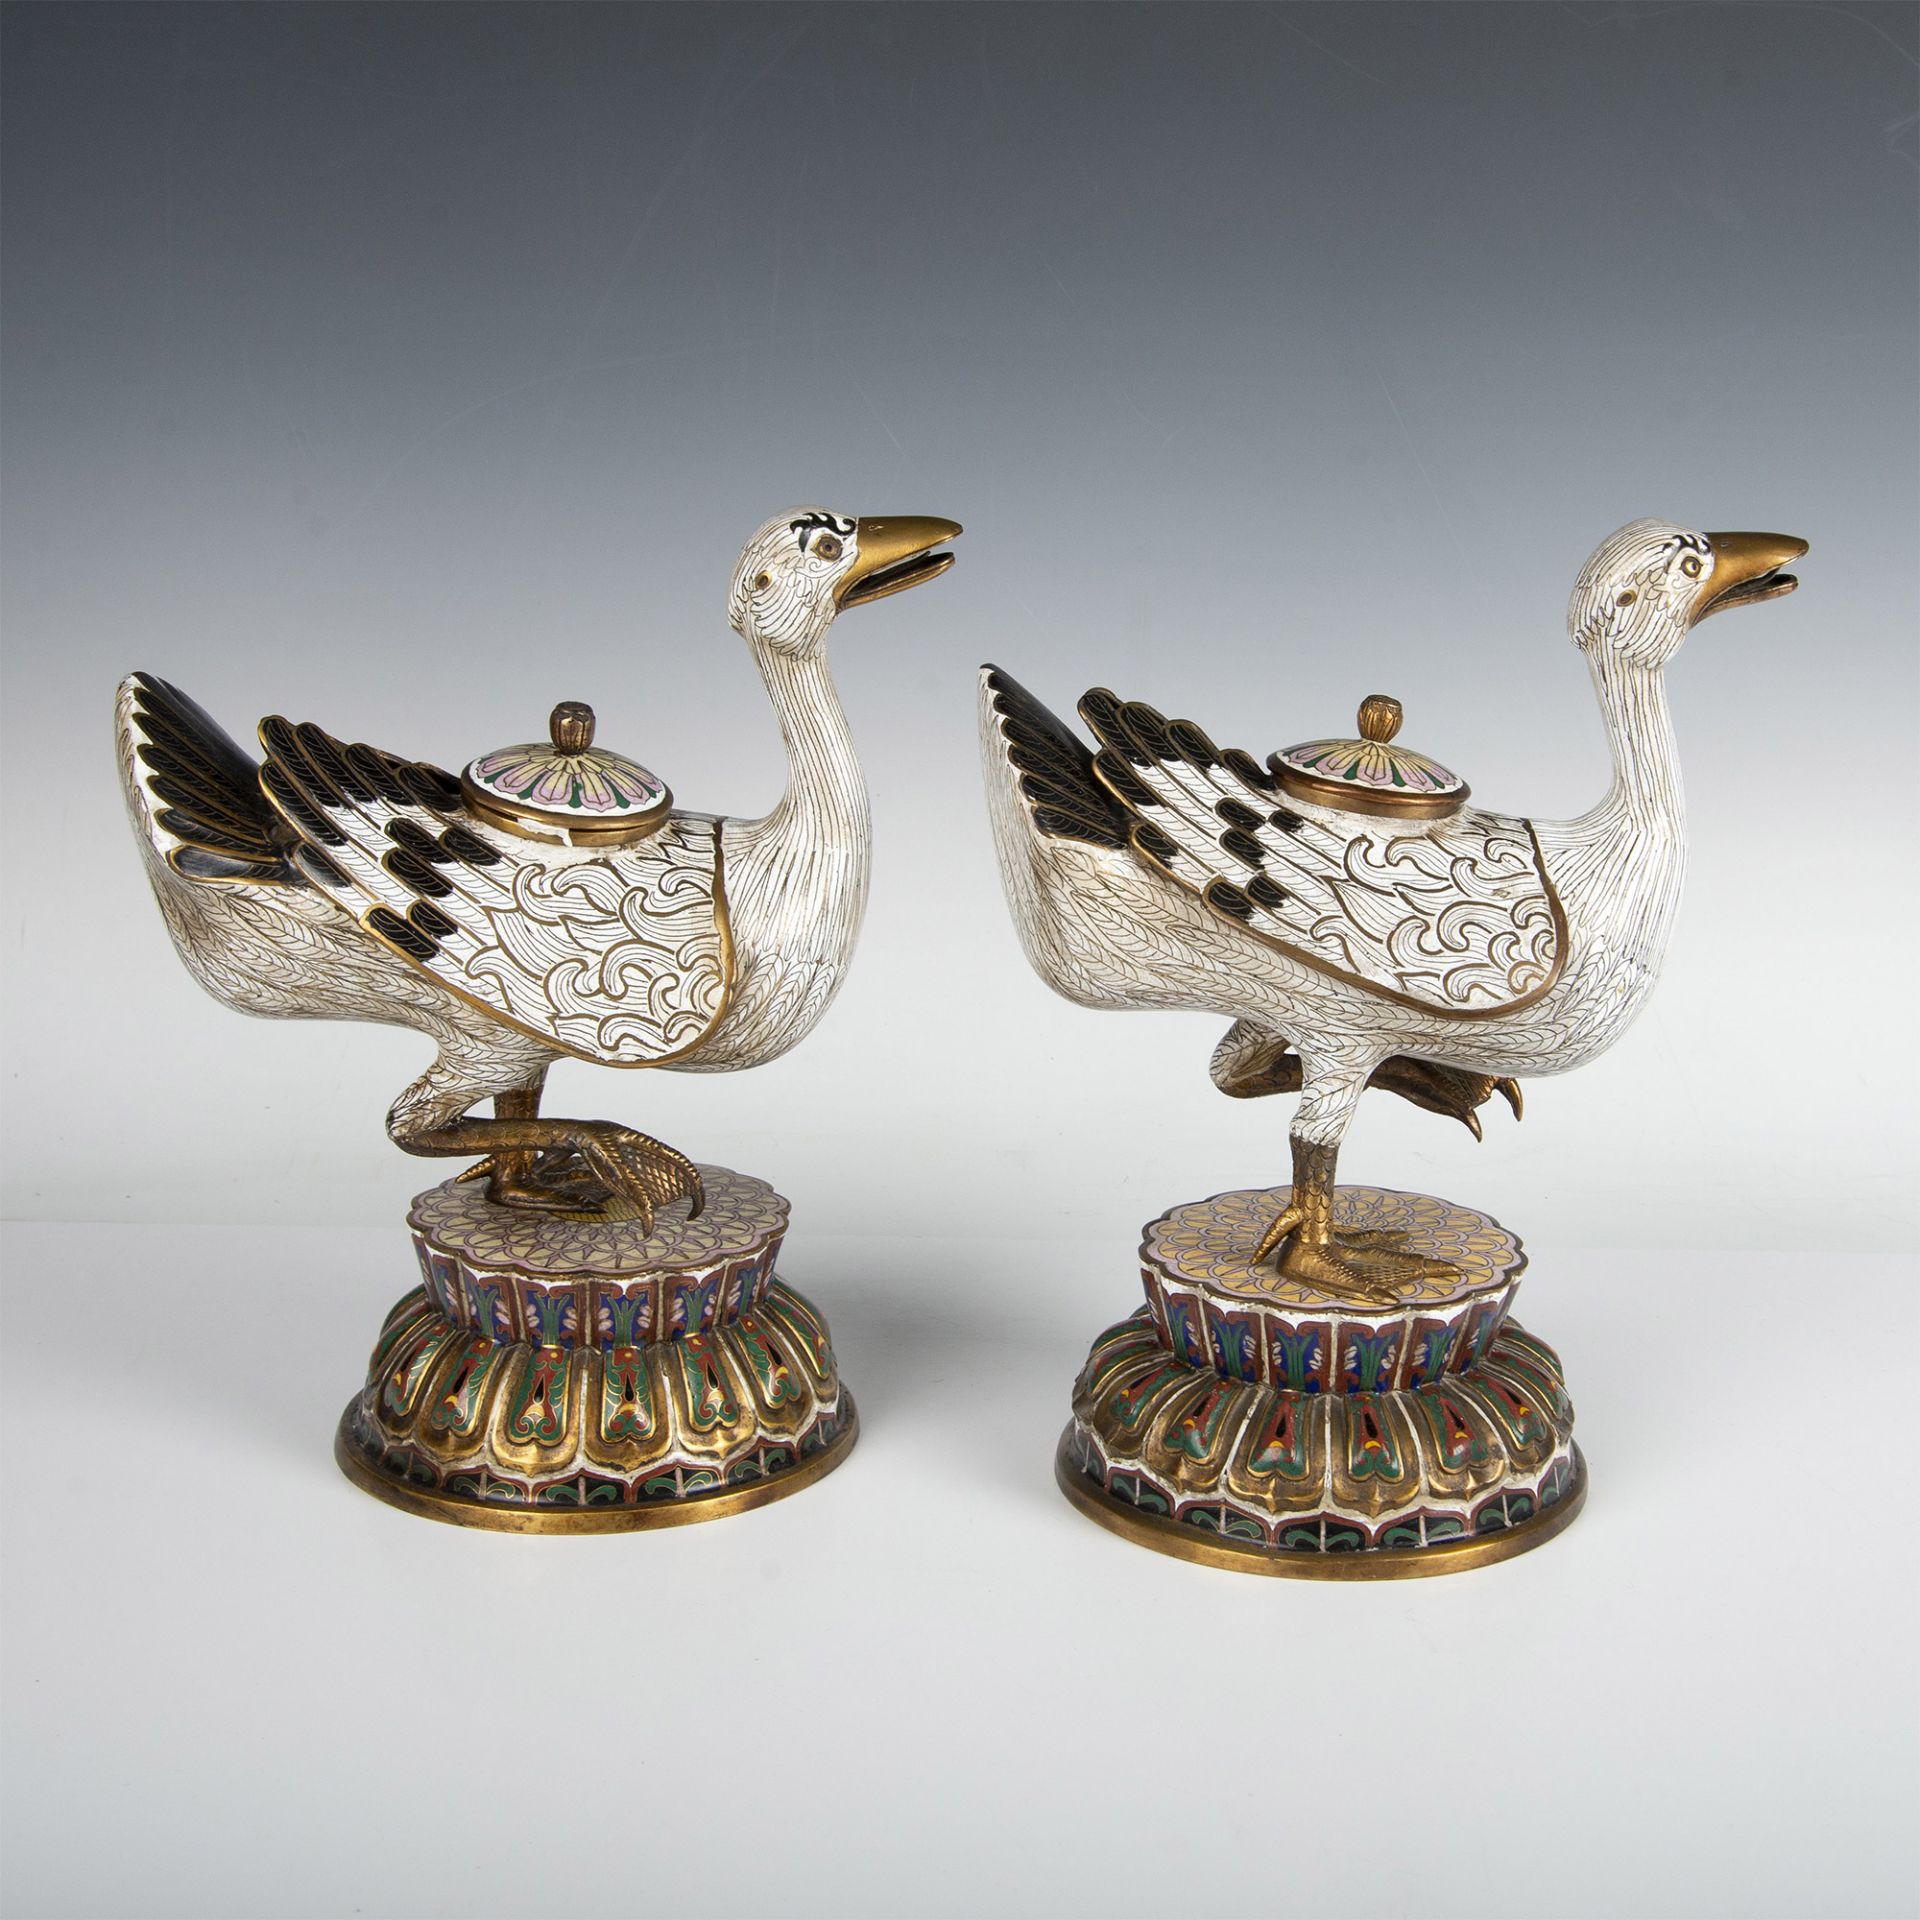 Pair of Chinese Cloisonne Duck Censers - Image 9 of 11